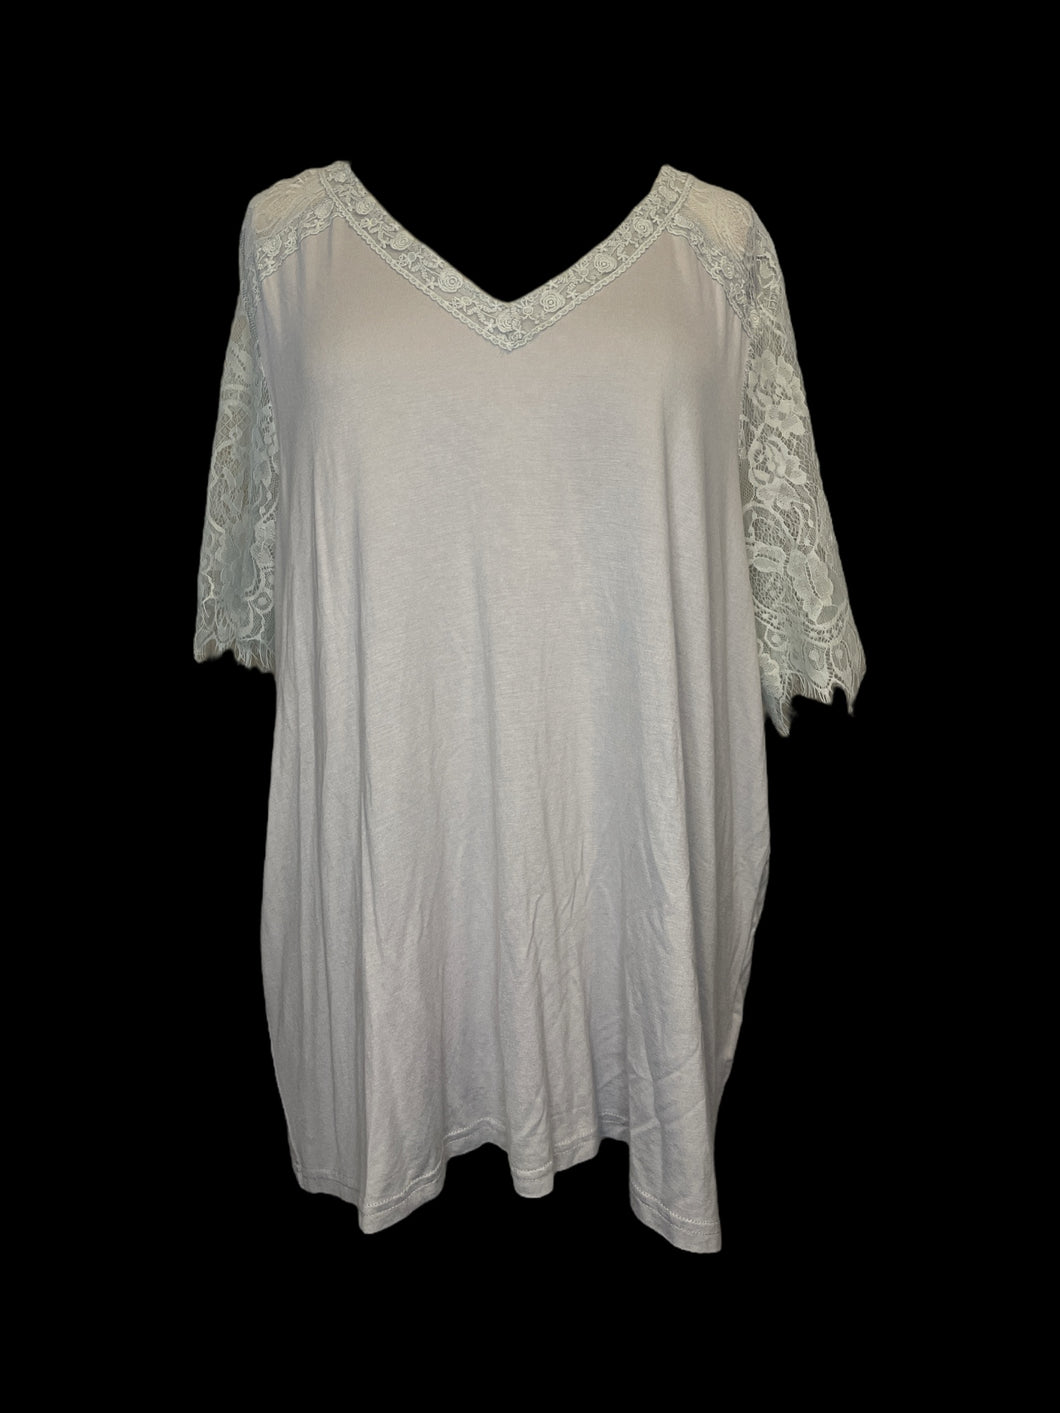 2X Light blue short sleeve lace v-neckline top w/ lace cutout, & lace sleeves